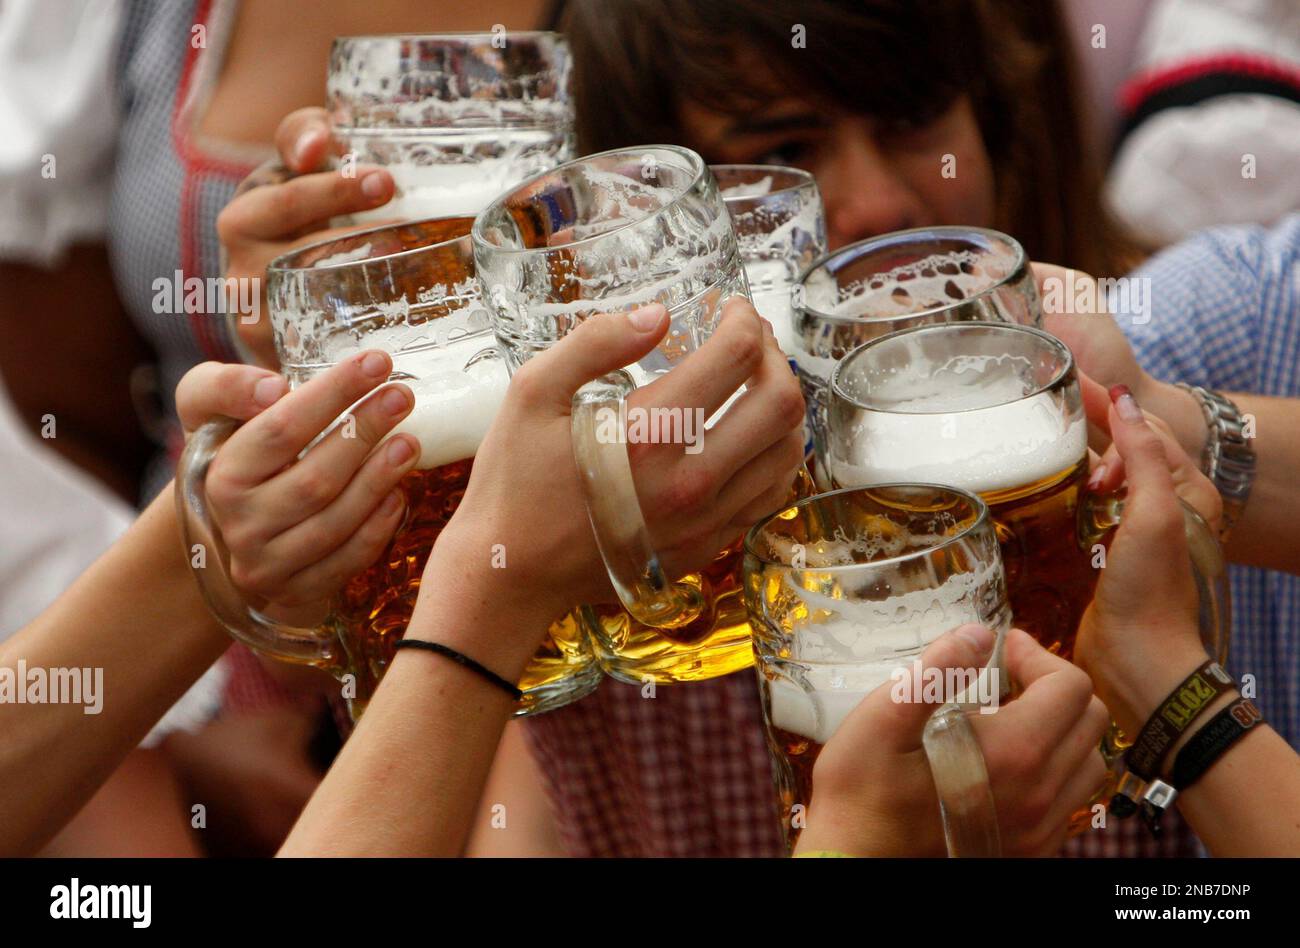 Visitors lift their beer mugs in the Hofbraeuhaus-tent after the opening of famous Bavarian "Oktoberfest" beer festival in a beer tent in Munich, southern Germany, on Saturday, Sept.17, 2011. The world's